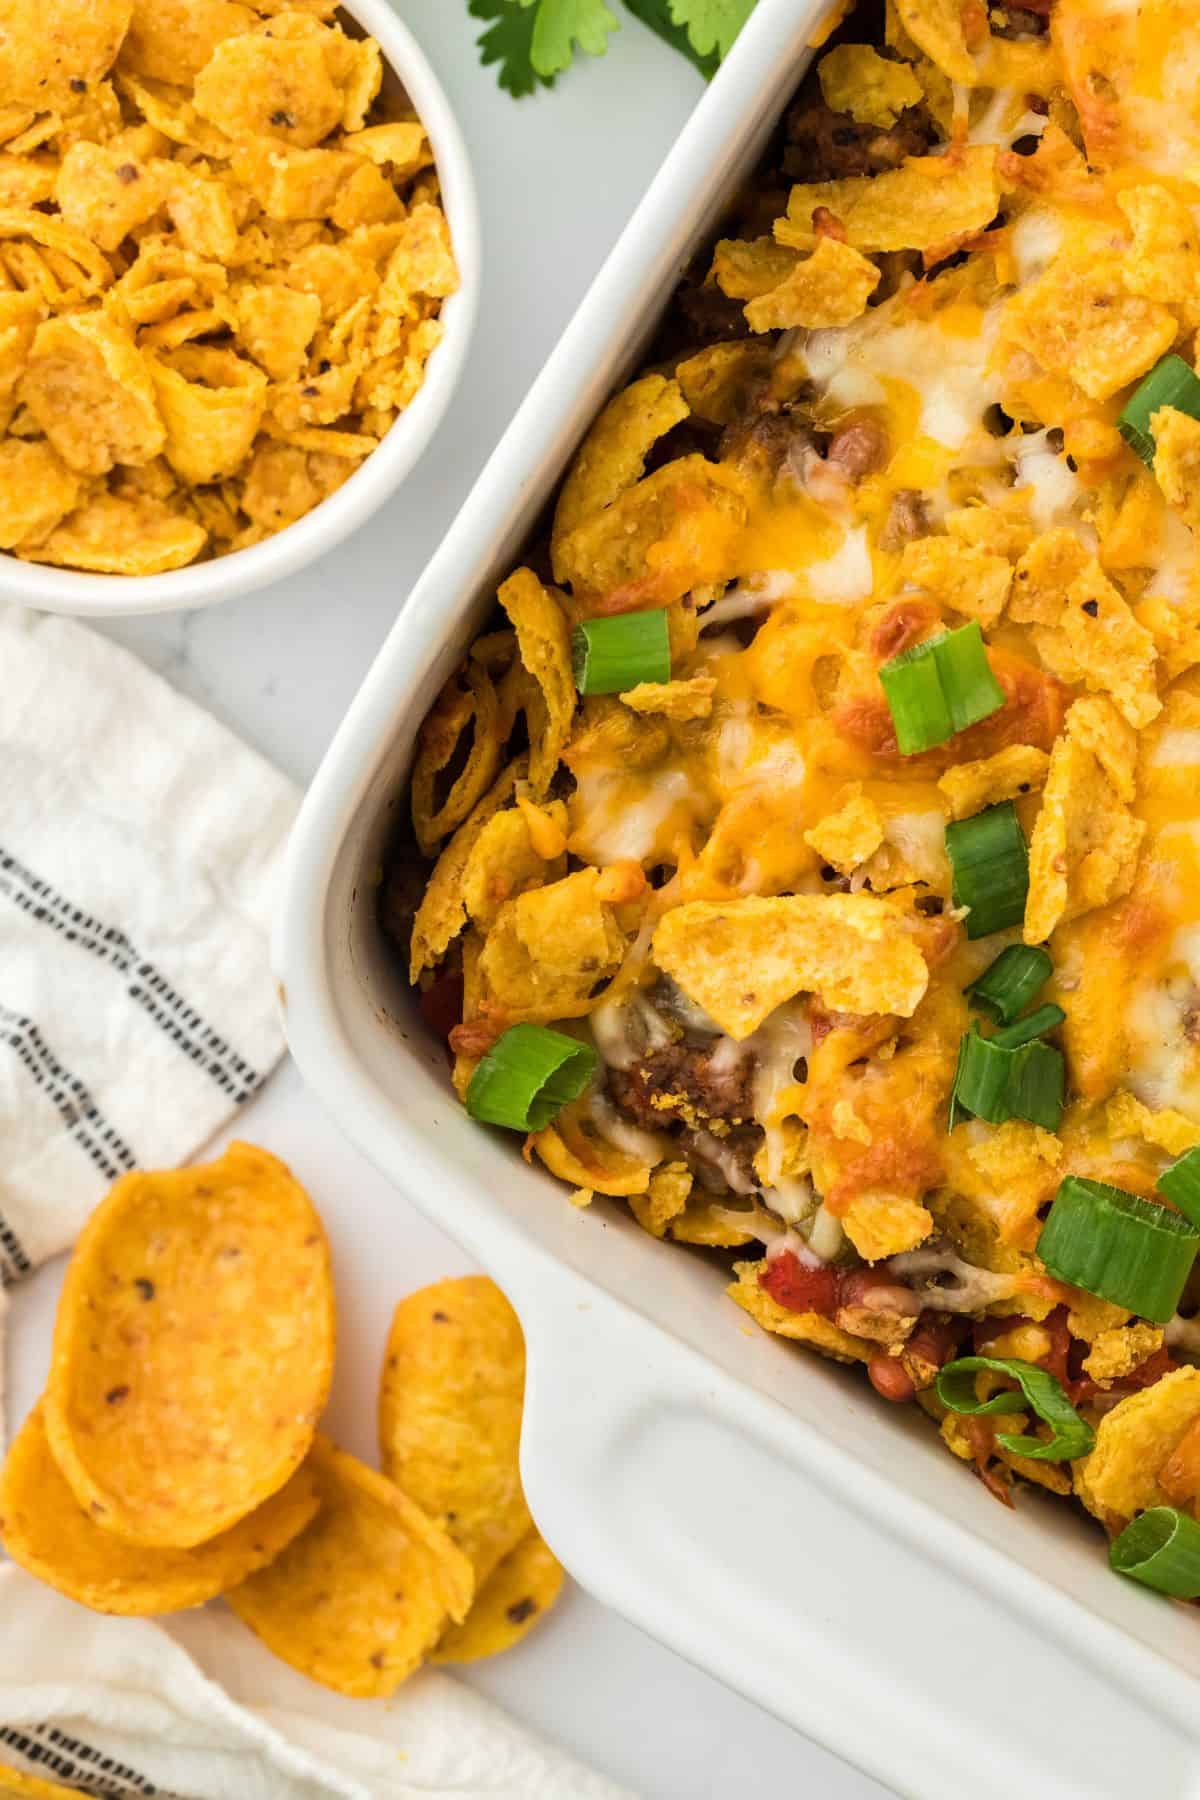 Overhead shot of a baked Frito pie with ground beef, melted cheese, Fritos corn chips, and chopped green onions. A bowl of Fritos and some loose chips are next to the dish